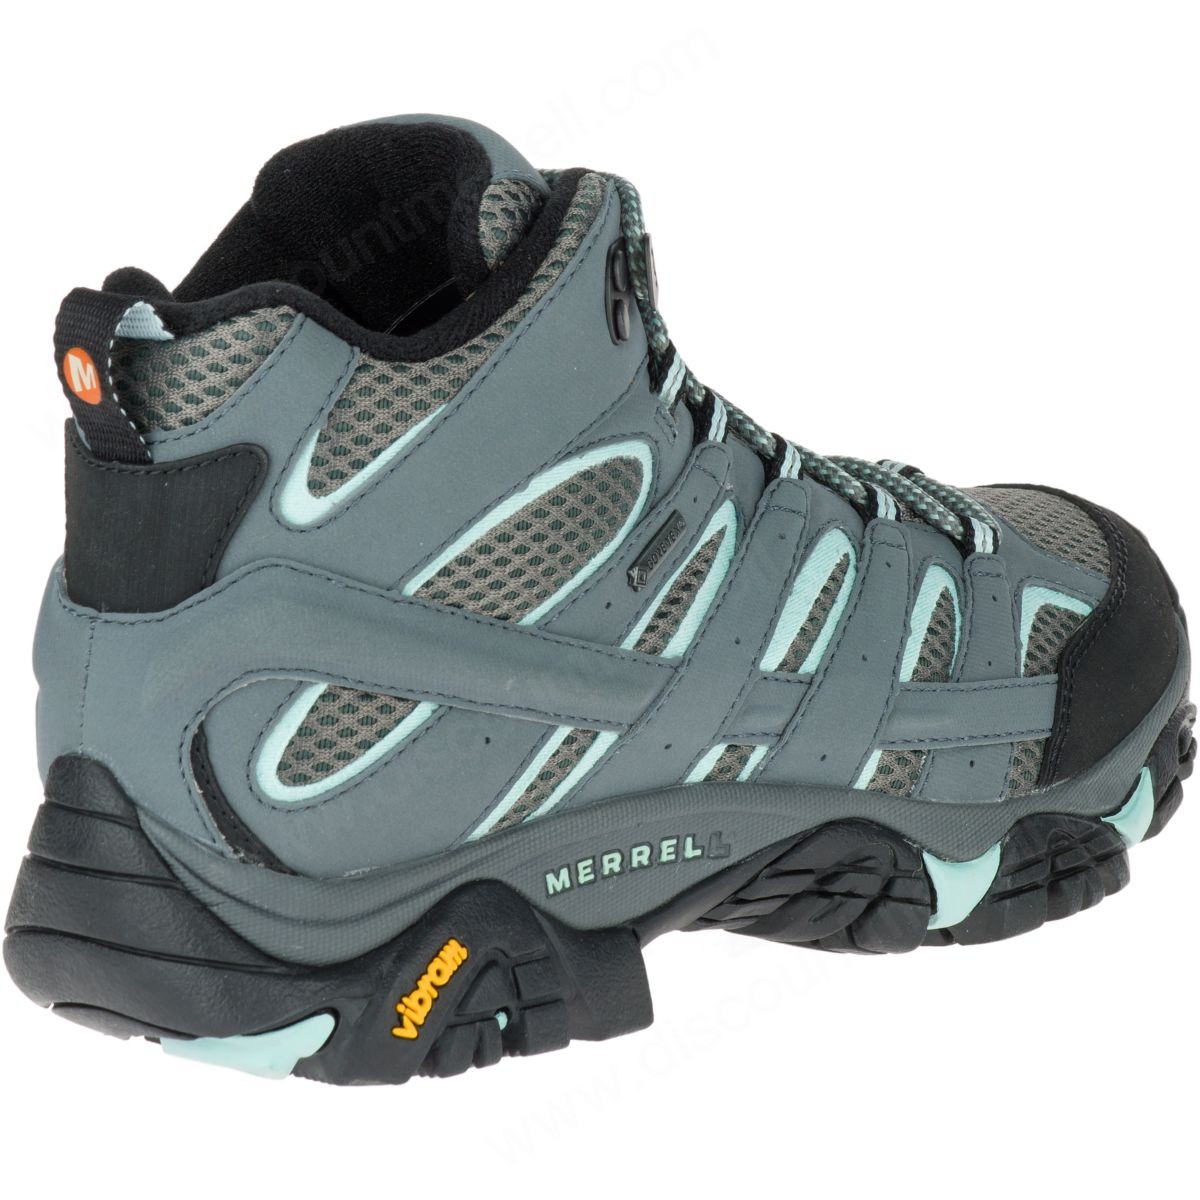 Merrell Women's Moab Mother Of All Boots™ Mid Gore-Tex® Wide Width Sedona Sage - -7